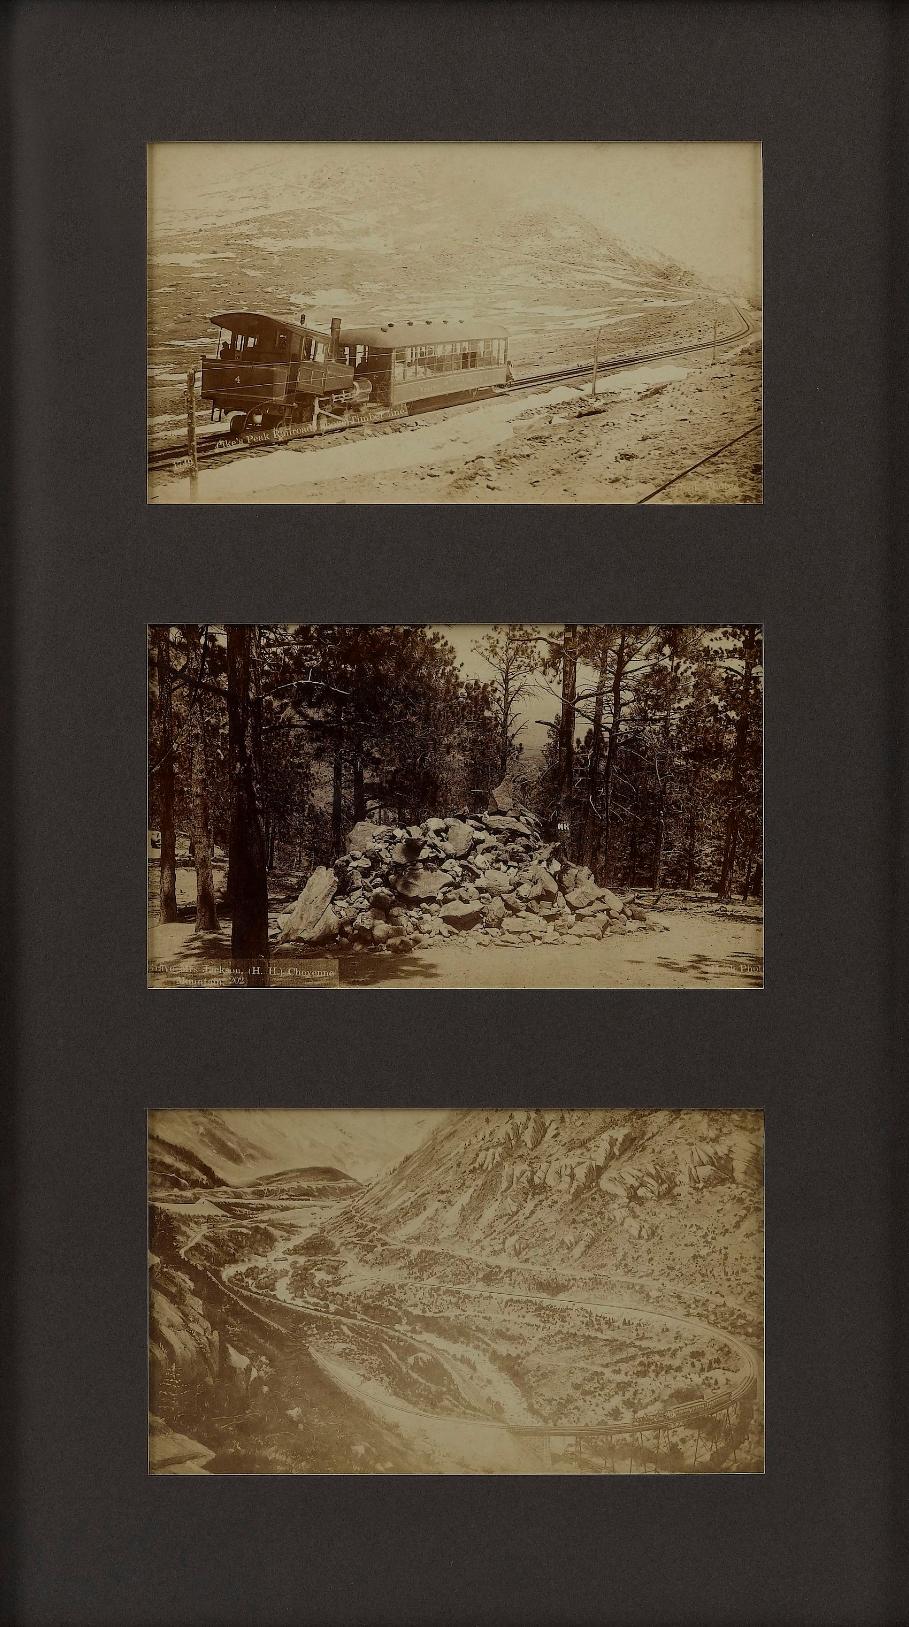 Late 19th Century Vintage Manitou and Pikes Peak Railway Postcards by Hook Photo, 1890